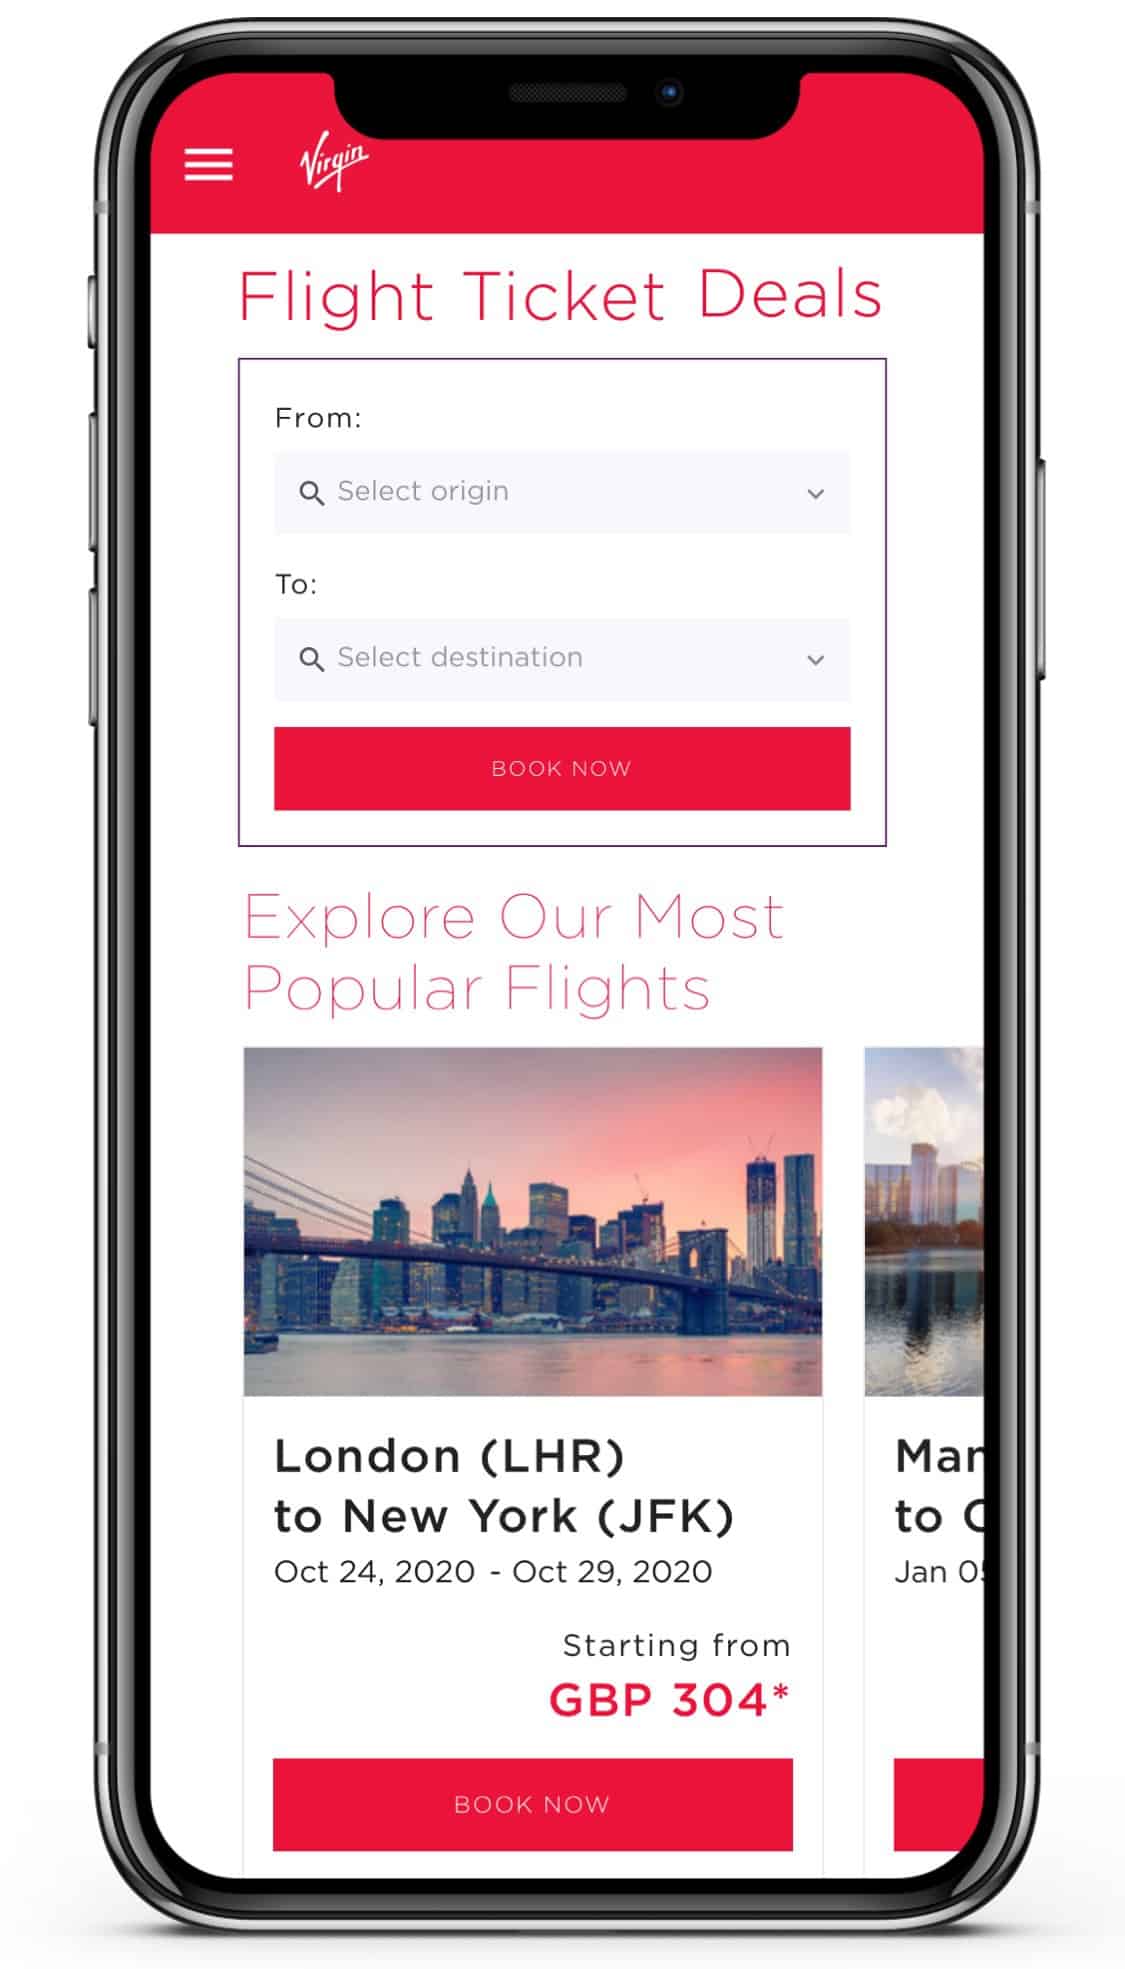 Virgin Australia AMP Page with modules